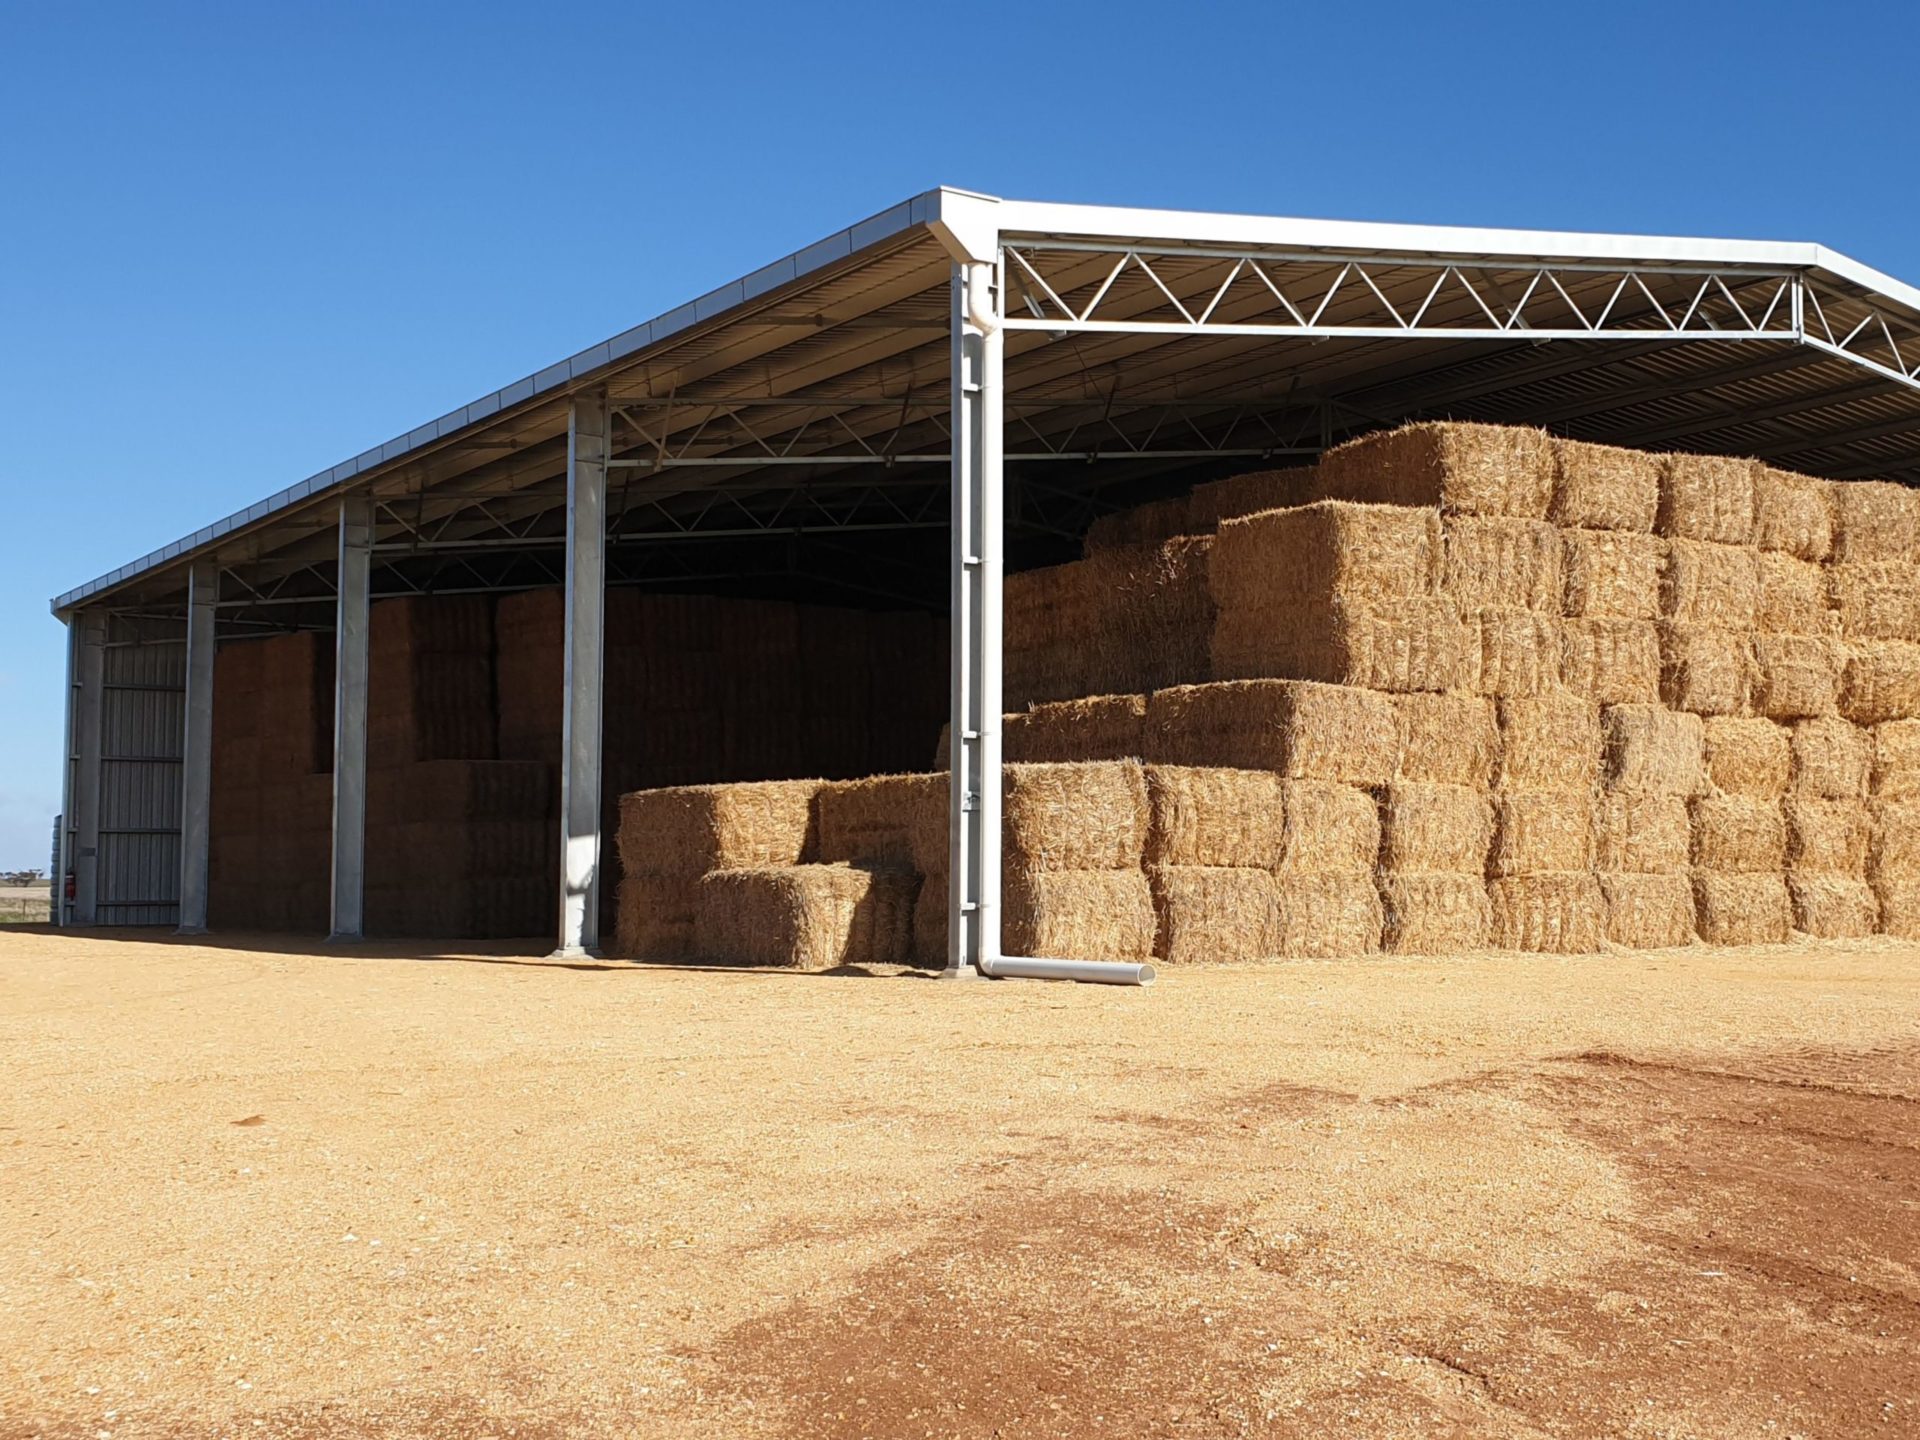 You are currently viewing 32m x 21m x 6m two-sided hay shed